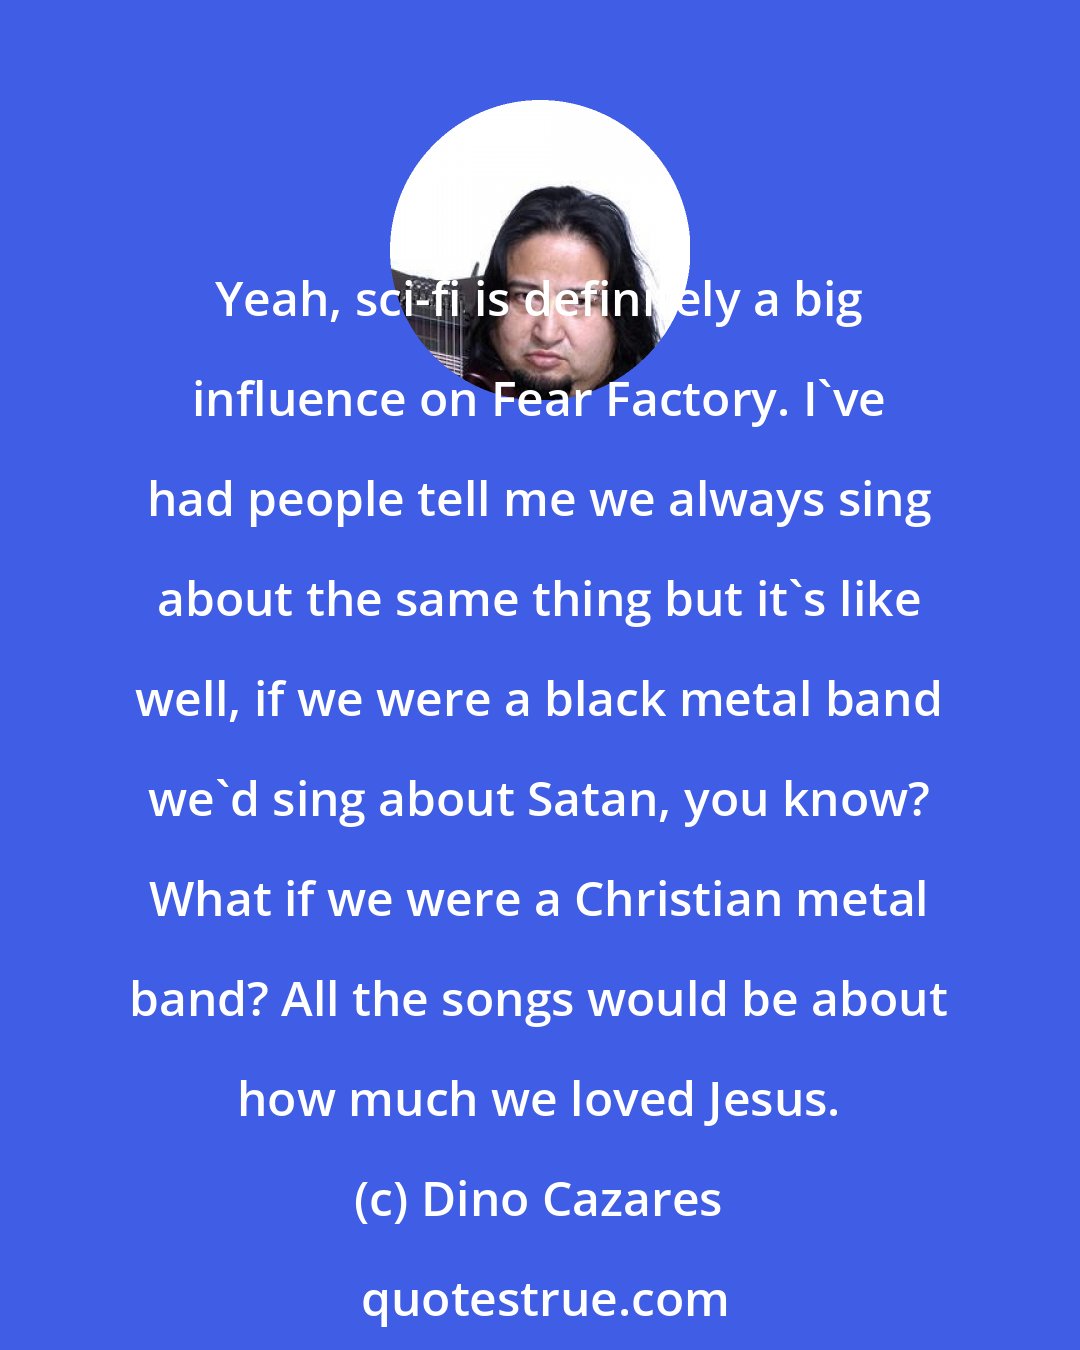 Dino Cazares: Yeah, sci-fi is definitely a big influence on Fear Factory. I've had people tell me we always sing about the same thing but it's like well, if we were a black metal band we'd sing about Satan, you know? What if we were a Christian metal band? All the songs would be about how much we loved Jesus.